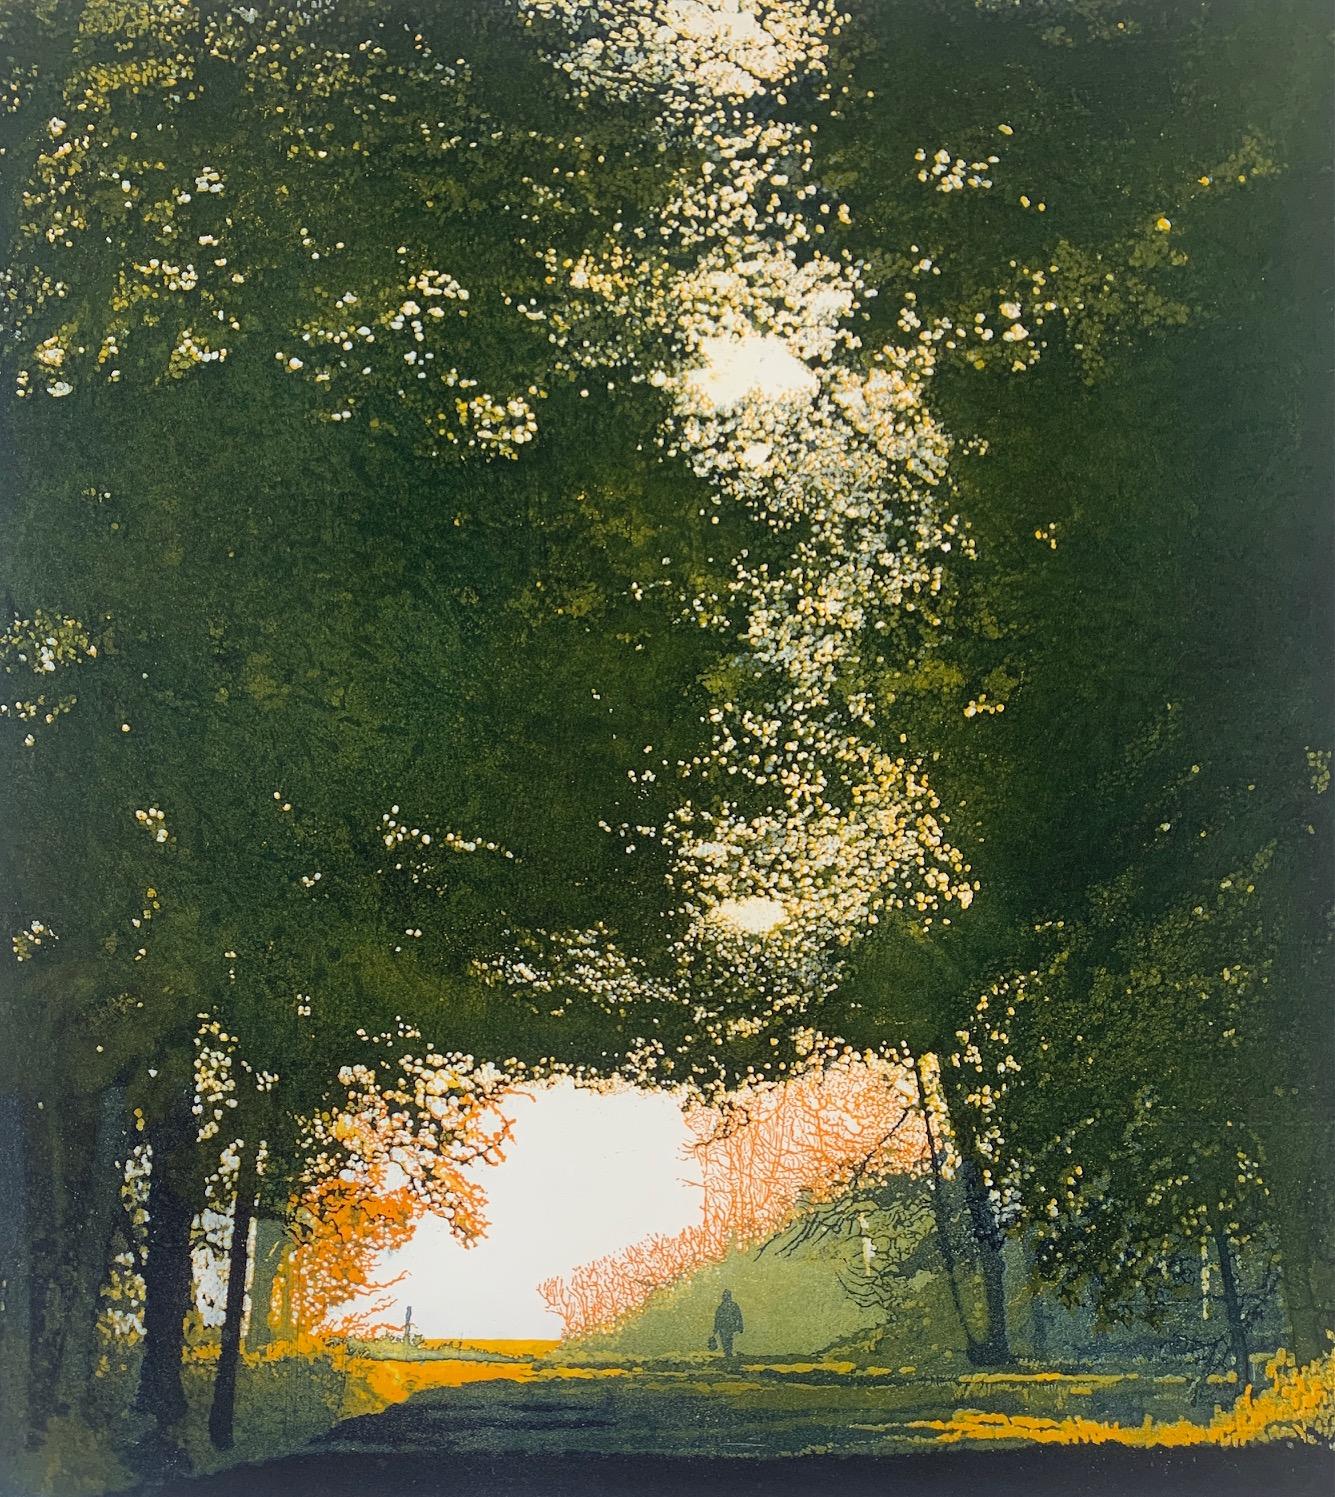 Going Home By Phil Greenwood [2021]

Going Home by artist Phil Greenwood is a limited edition print made using aquatint and etching. A figure is depicted walking through dense woodlands advancing into the light. The composition is mainly dark in the